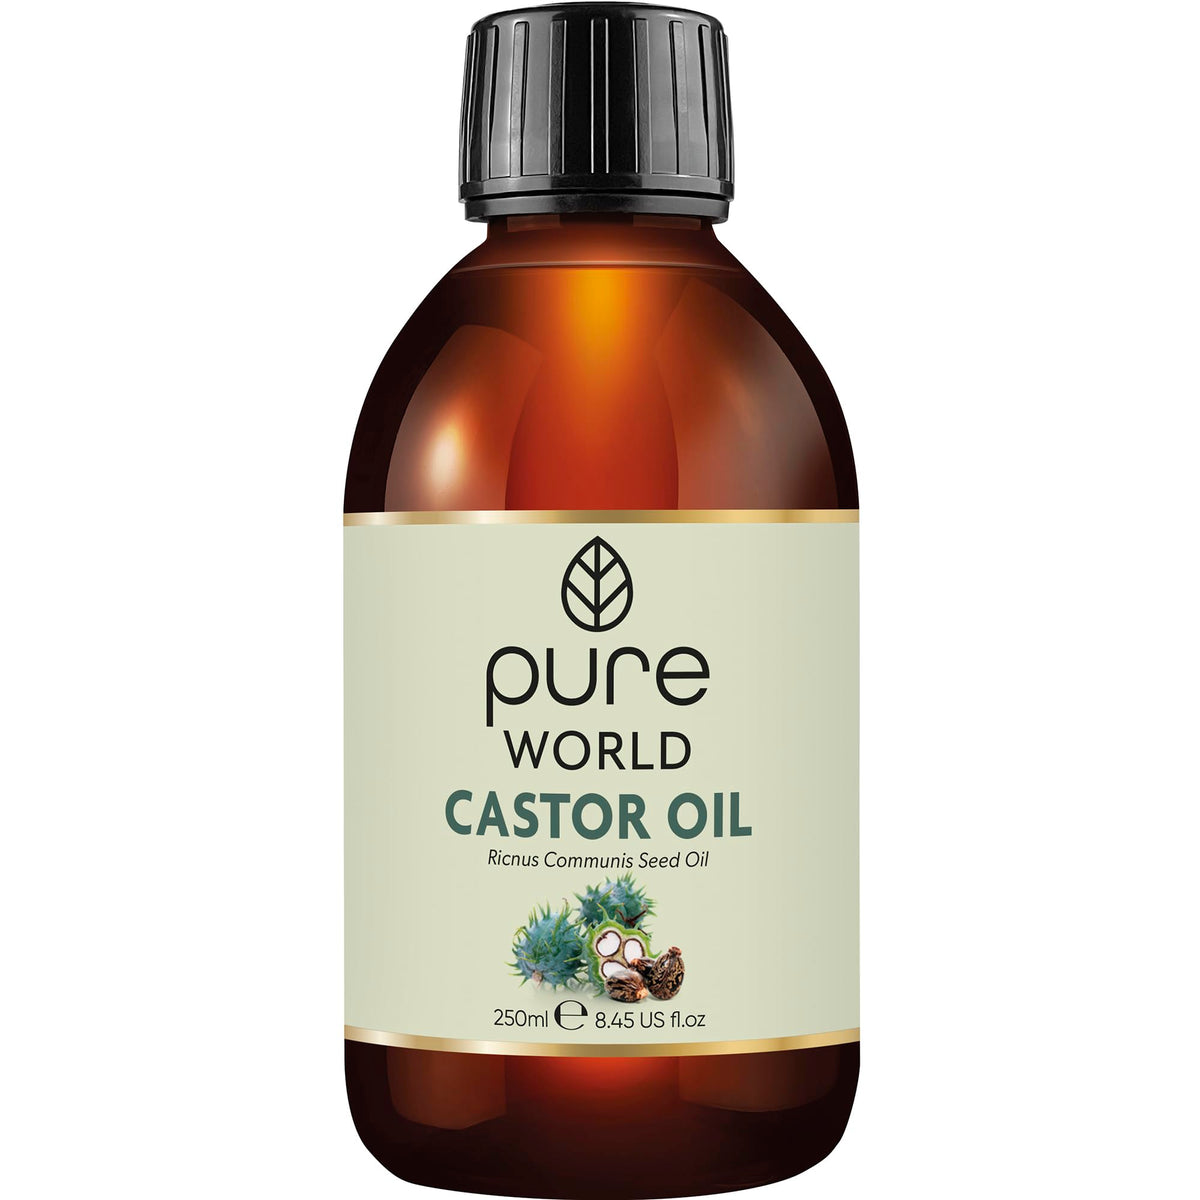 Pure World Natural Castor Oil 250ML Cold & Freshly Pressed 100% Pure and Undiluted Hexane Free Nourish Your Skin and Hair Eyebrows, Nails, Beard, Hair, Eyelash Growth Food Grade